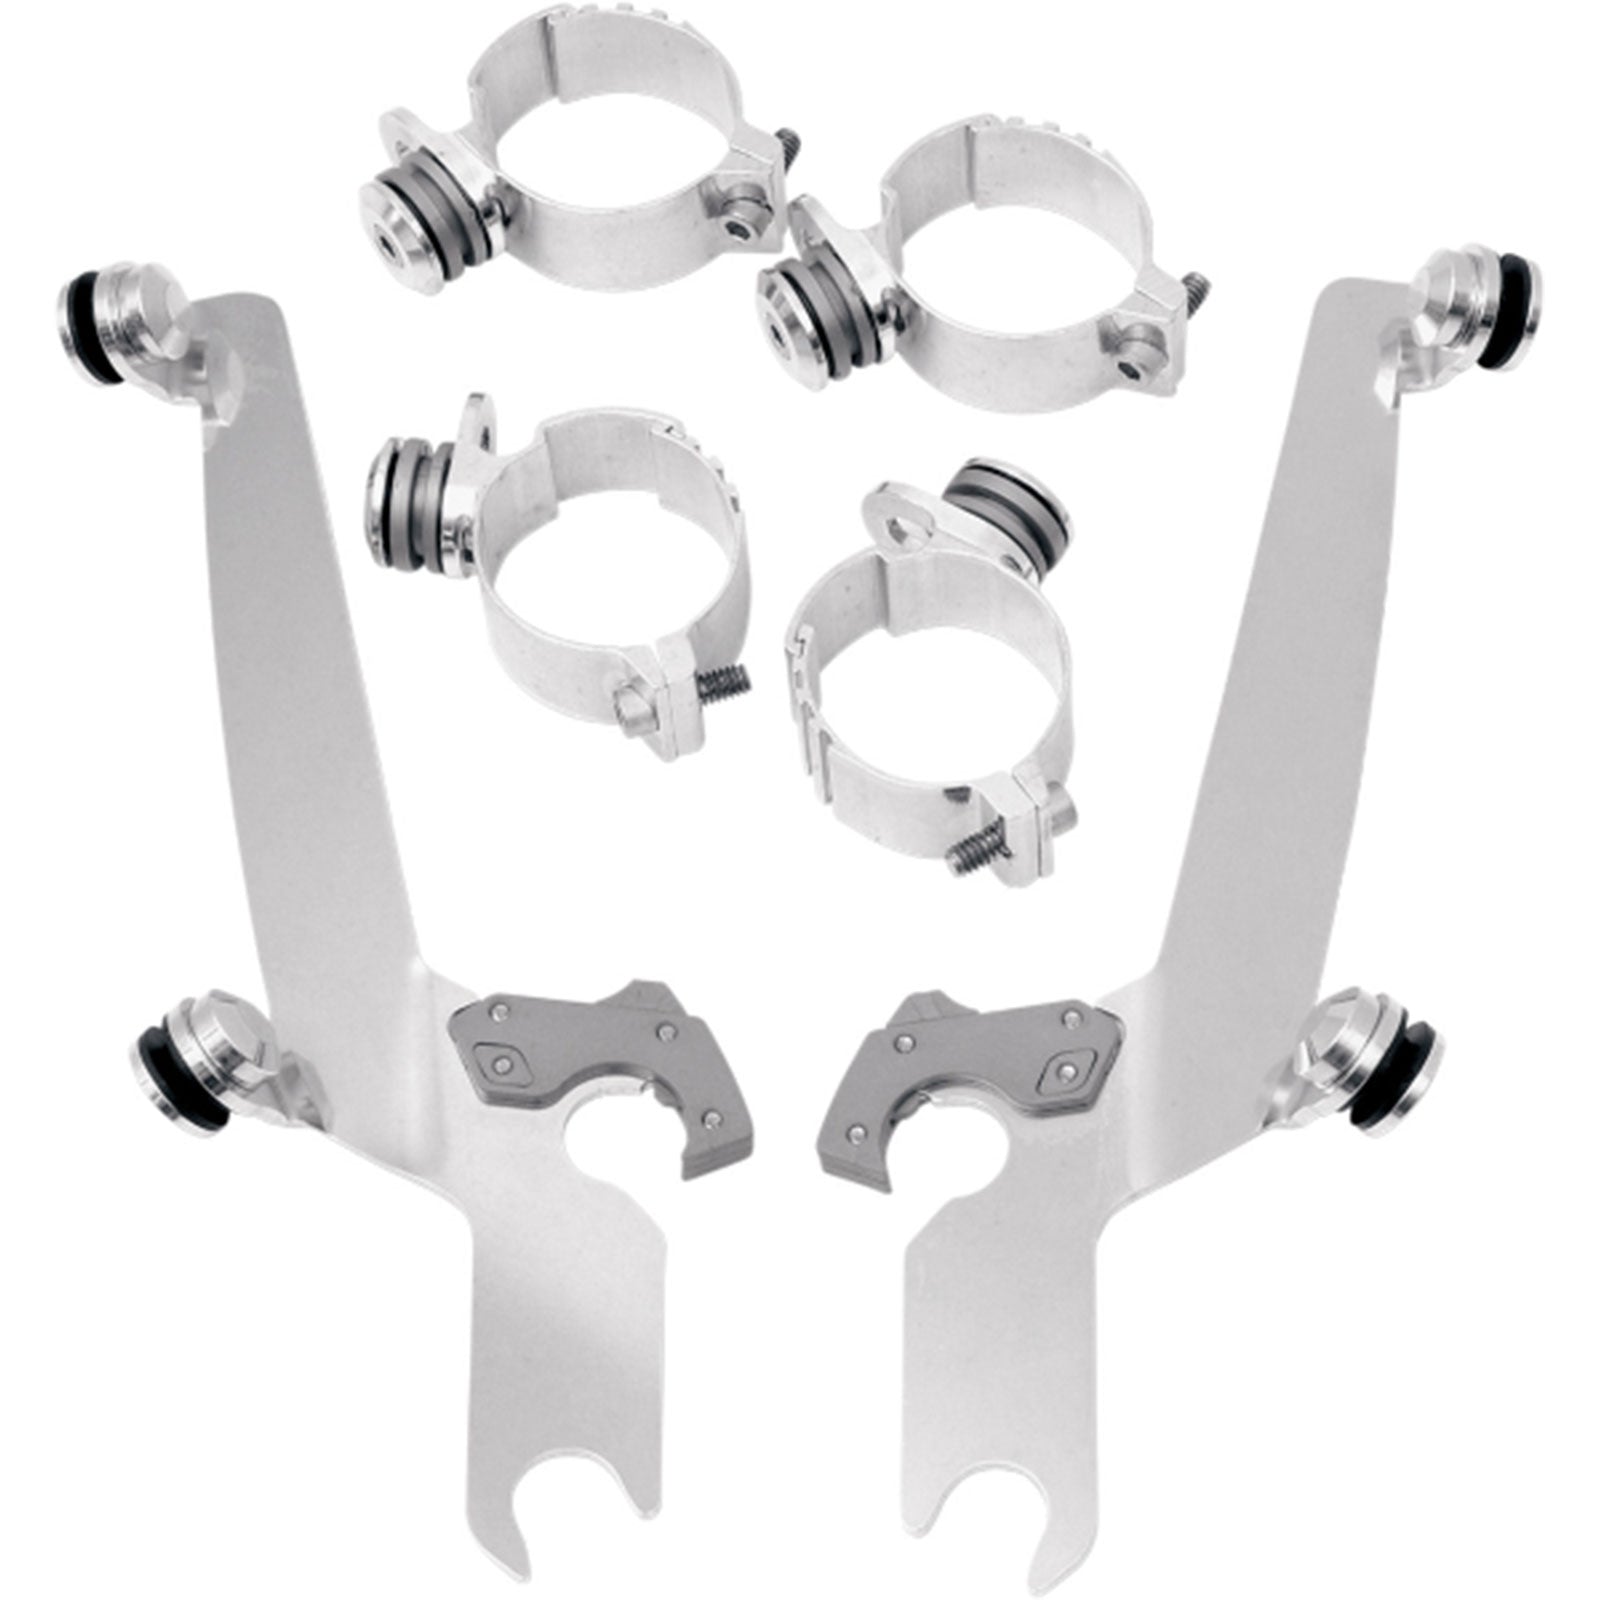 Memphis Shades Sportshield Trigger-Lock Complete Mount Kit Motorcycle Accessories-2320